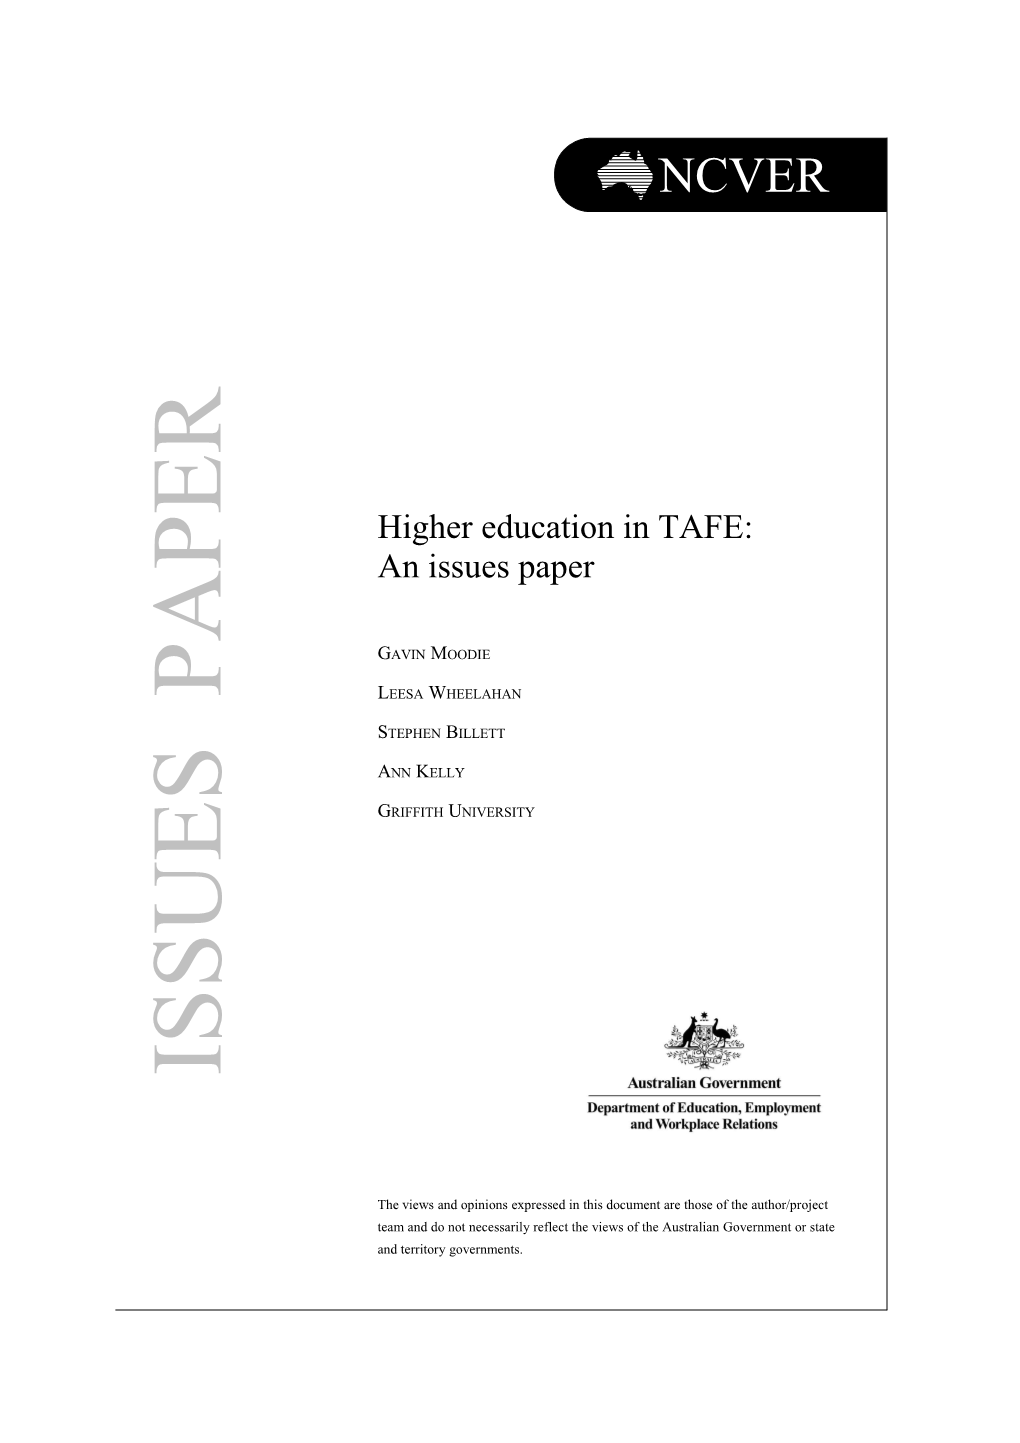 Higher Education in TAFE: an Issues Paper